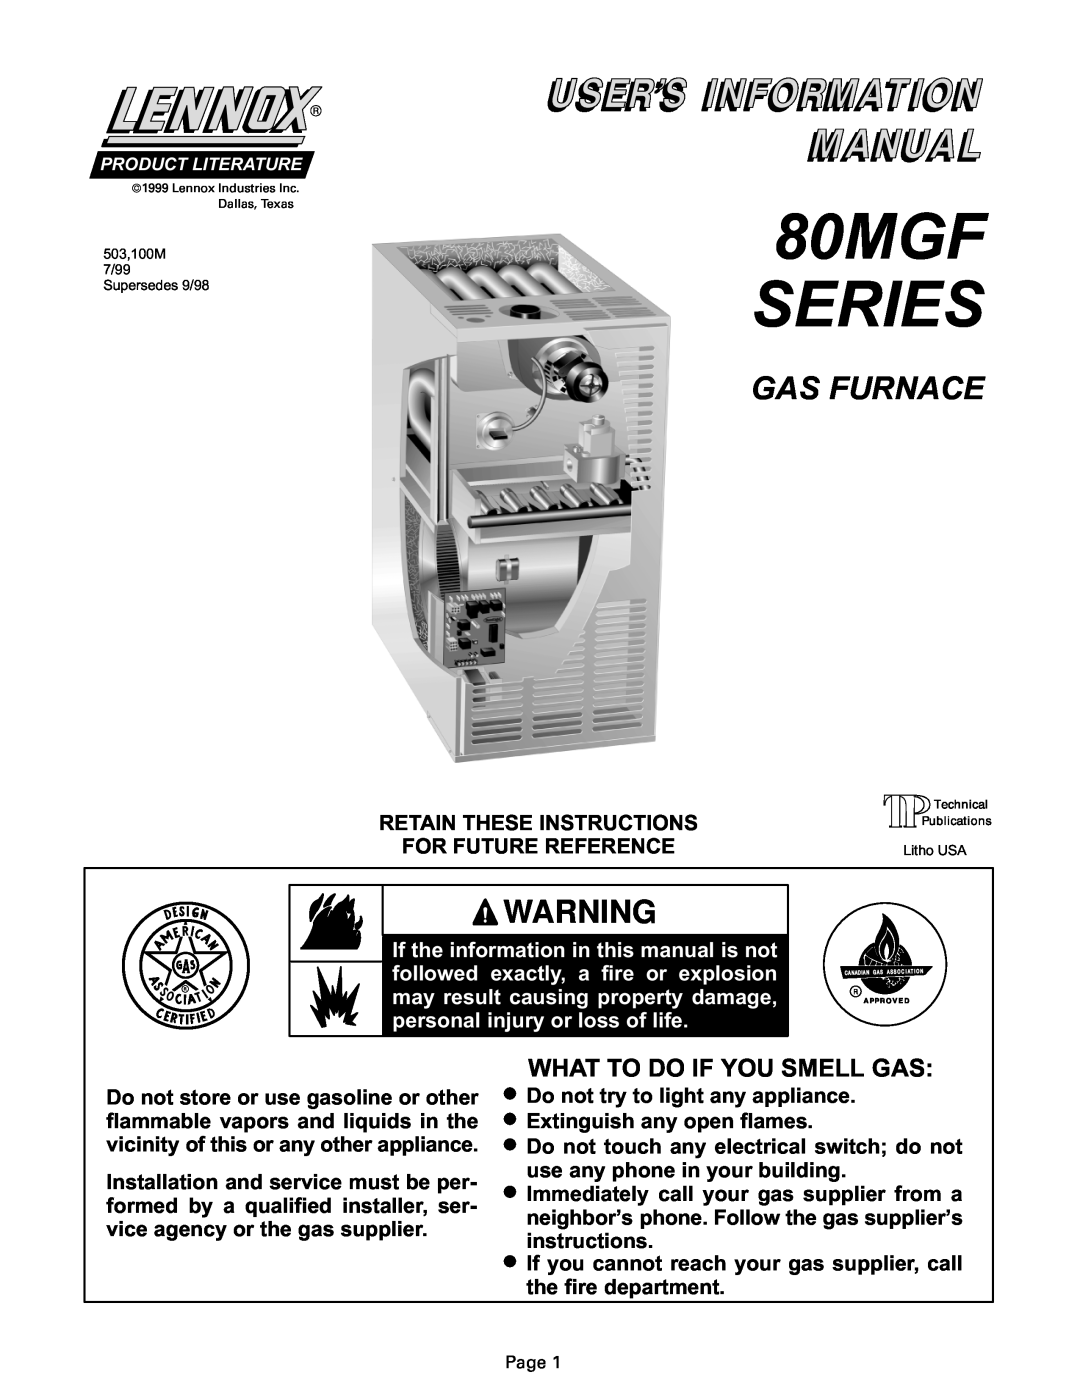 Lenoxx Electronics manual 80MGF SERIES, Gas Furnace, What To Do If You Smell Gas 